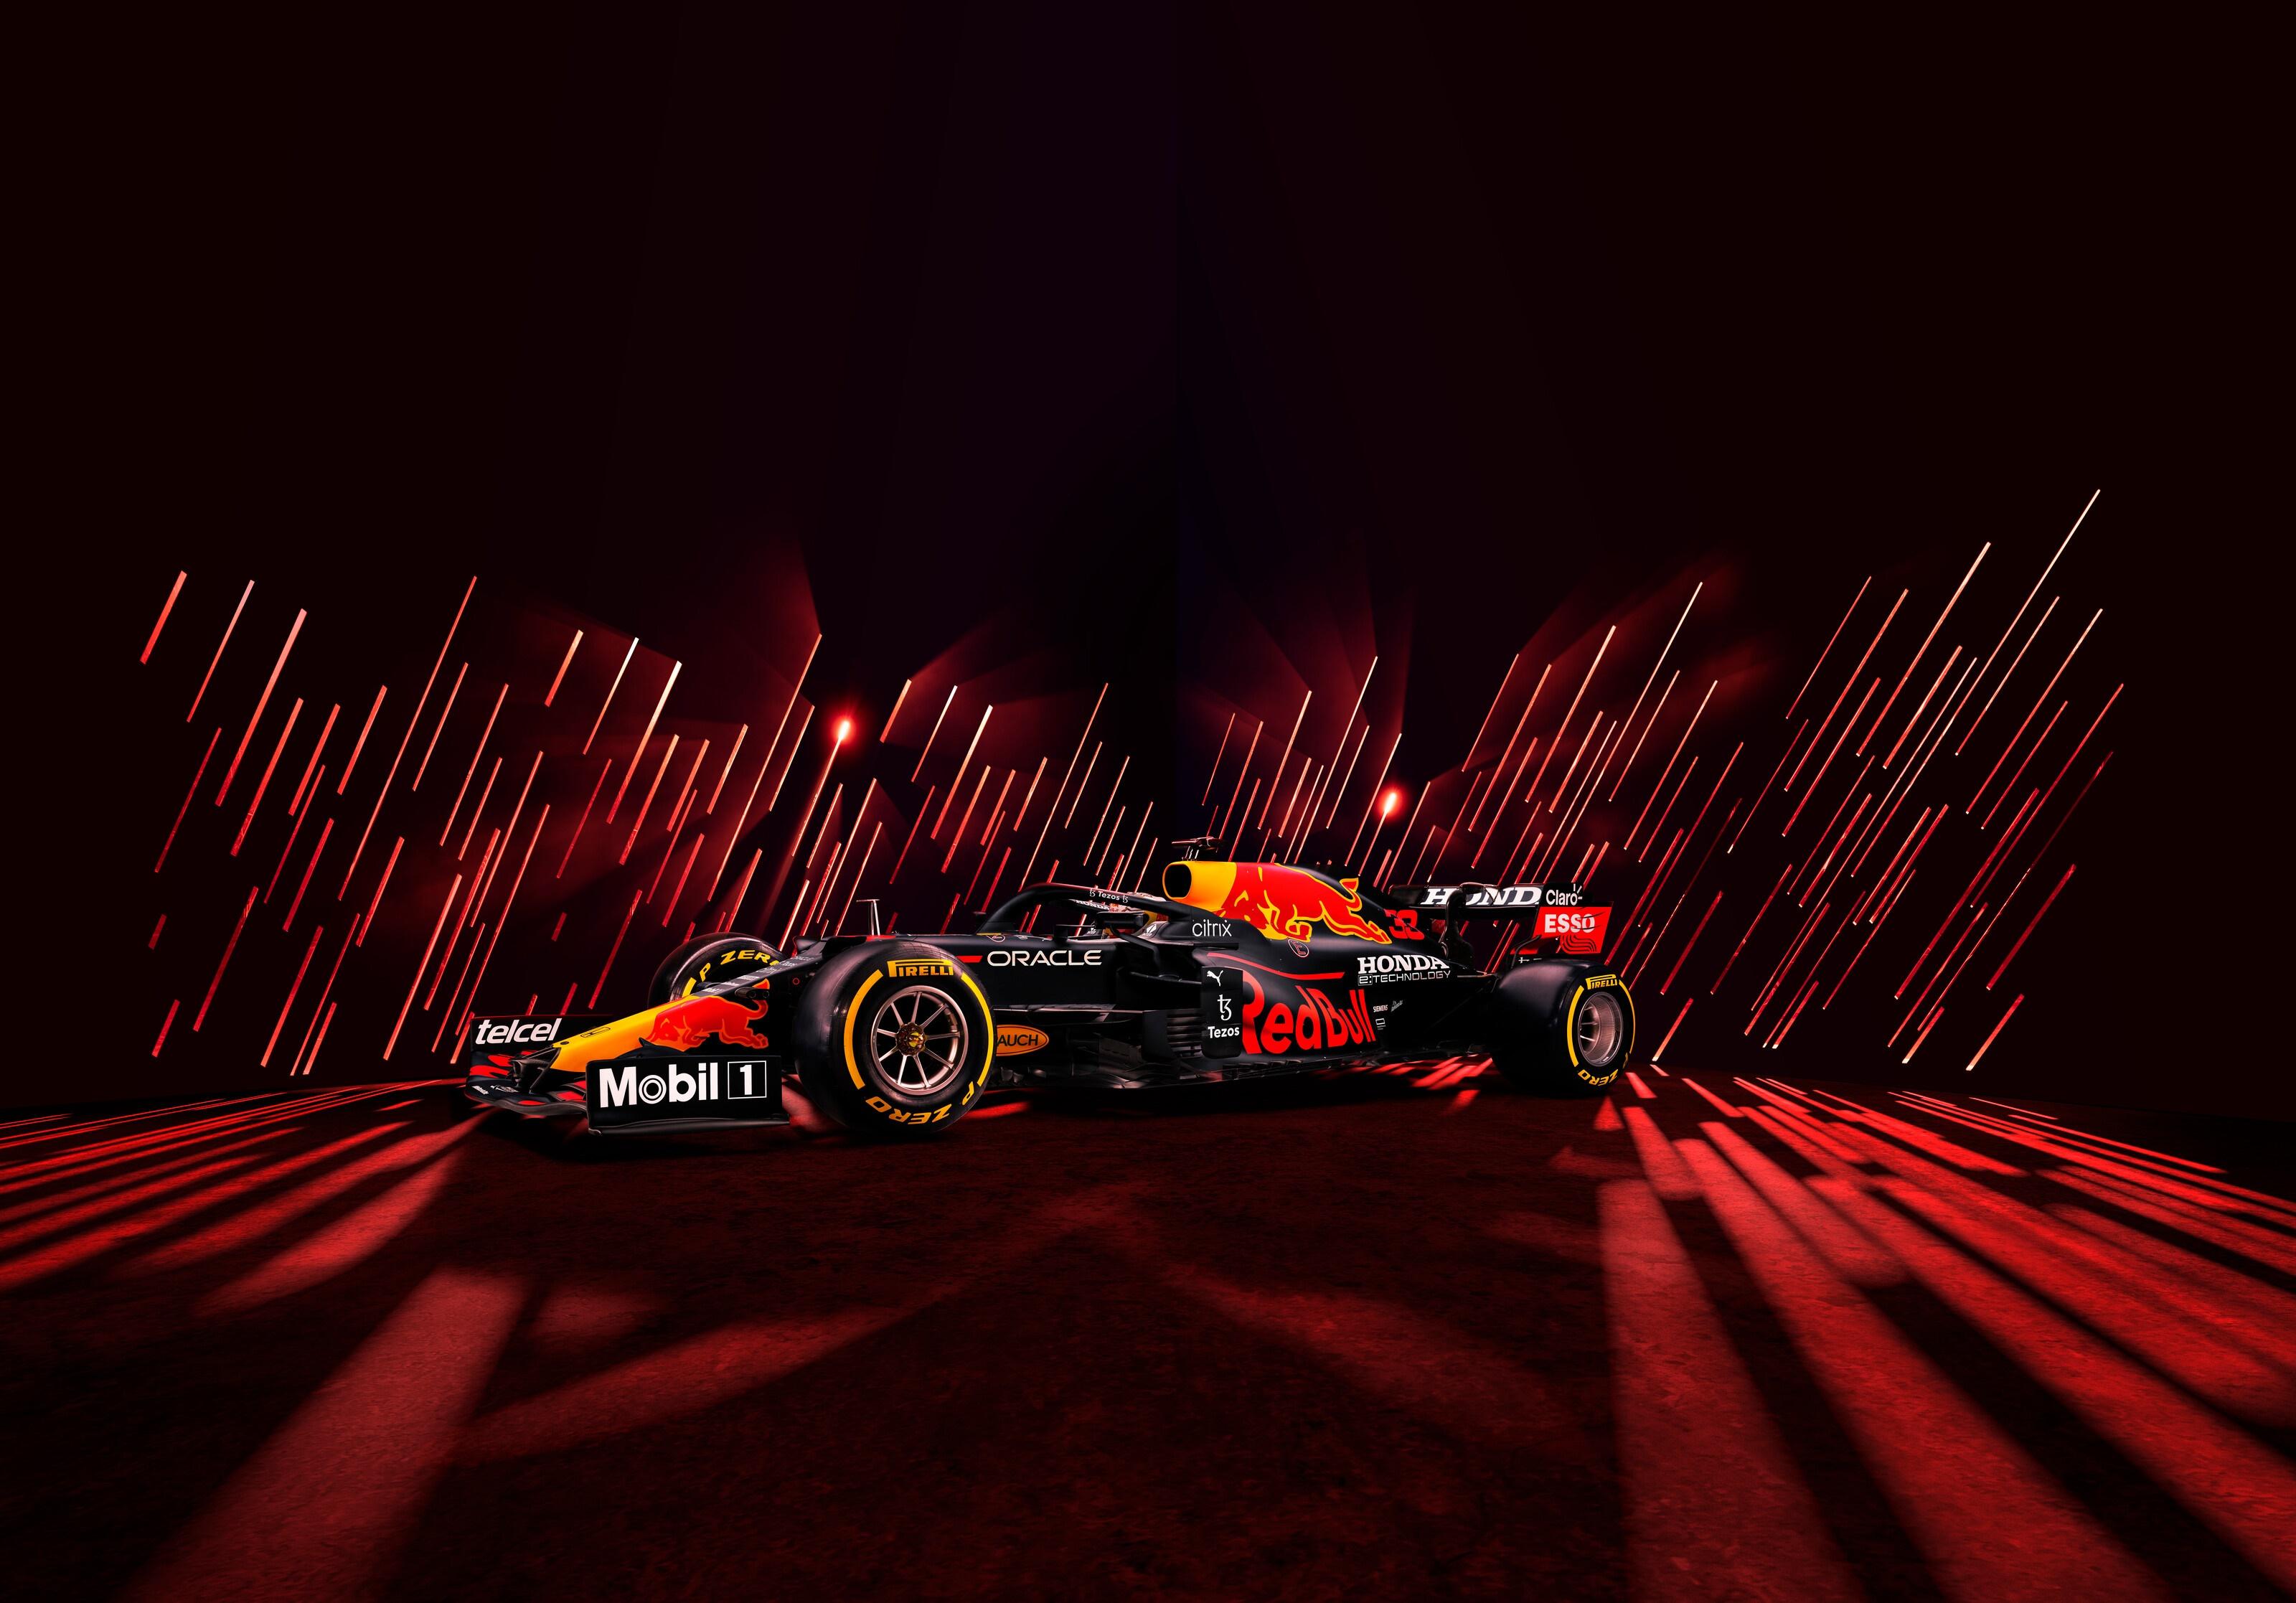 Red Bull F1 Racing Wallpapers - Top Free Red Bull F1 Racing Backgrounds ...